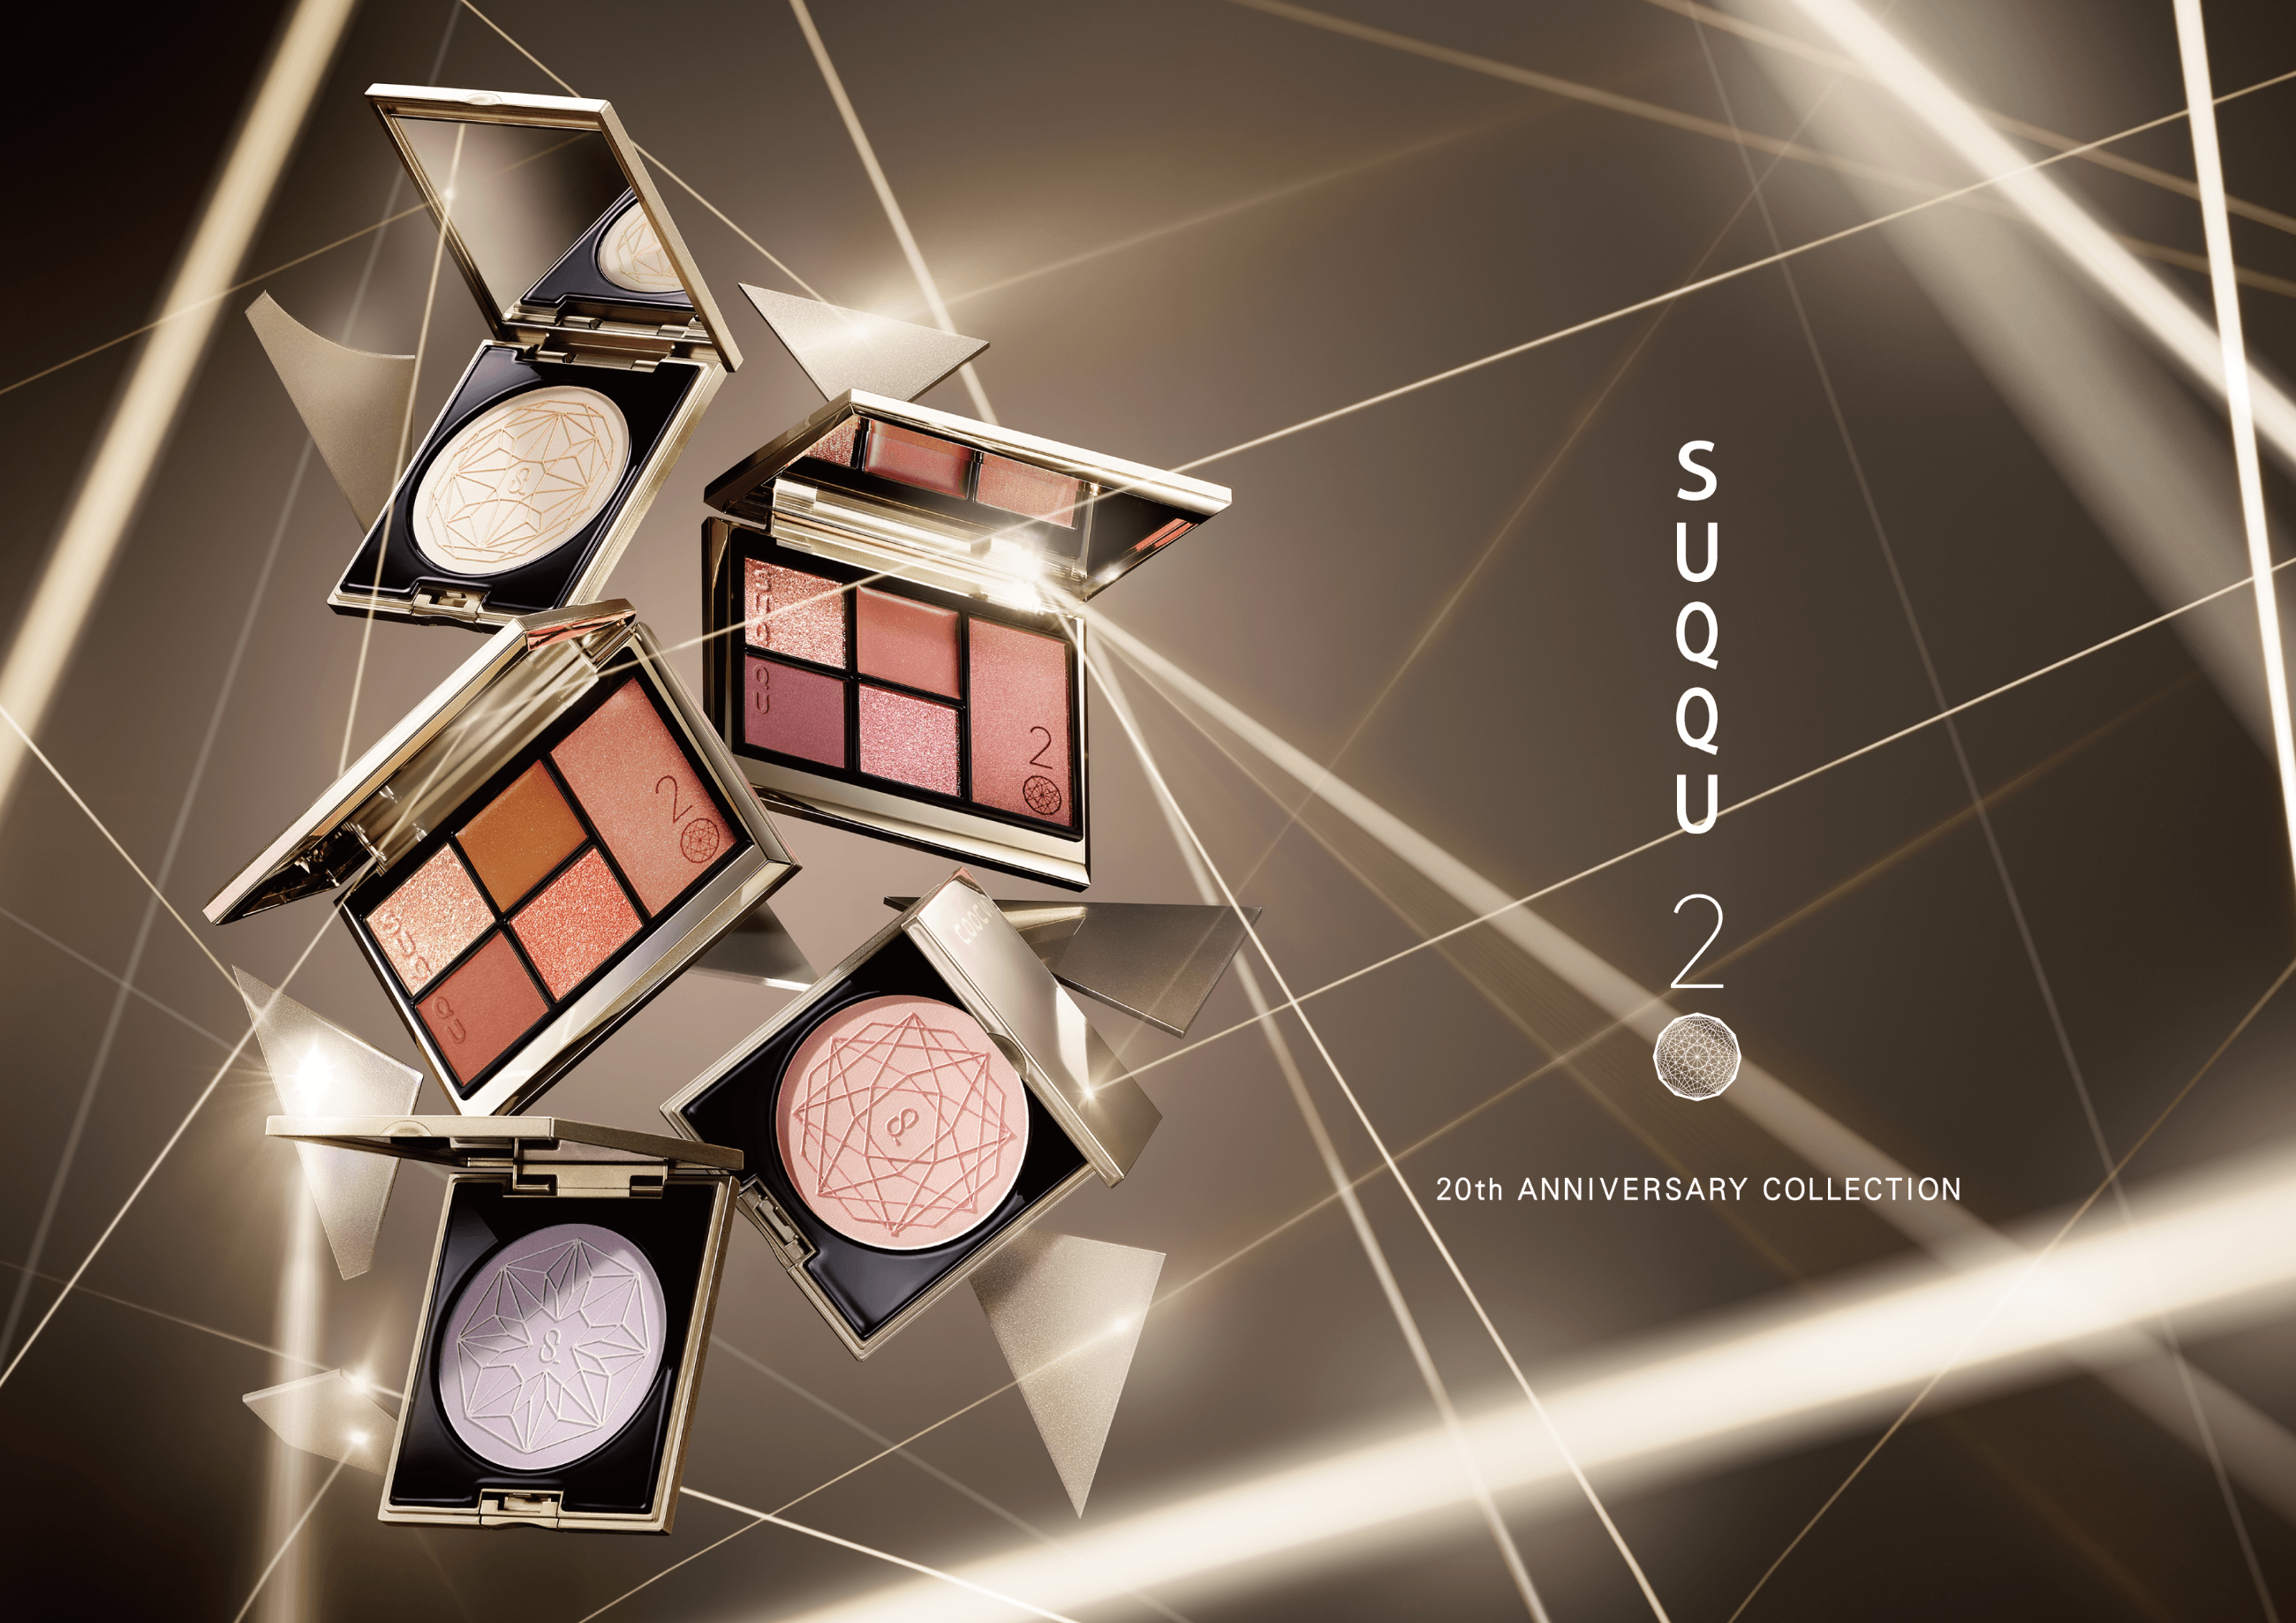 20th ANNIVERSARY COLLECTION | SUQQU ONLINE SHOP